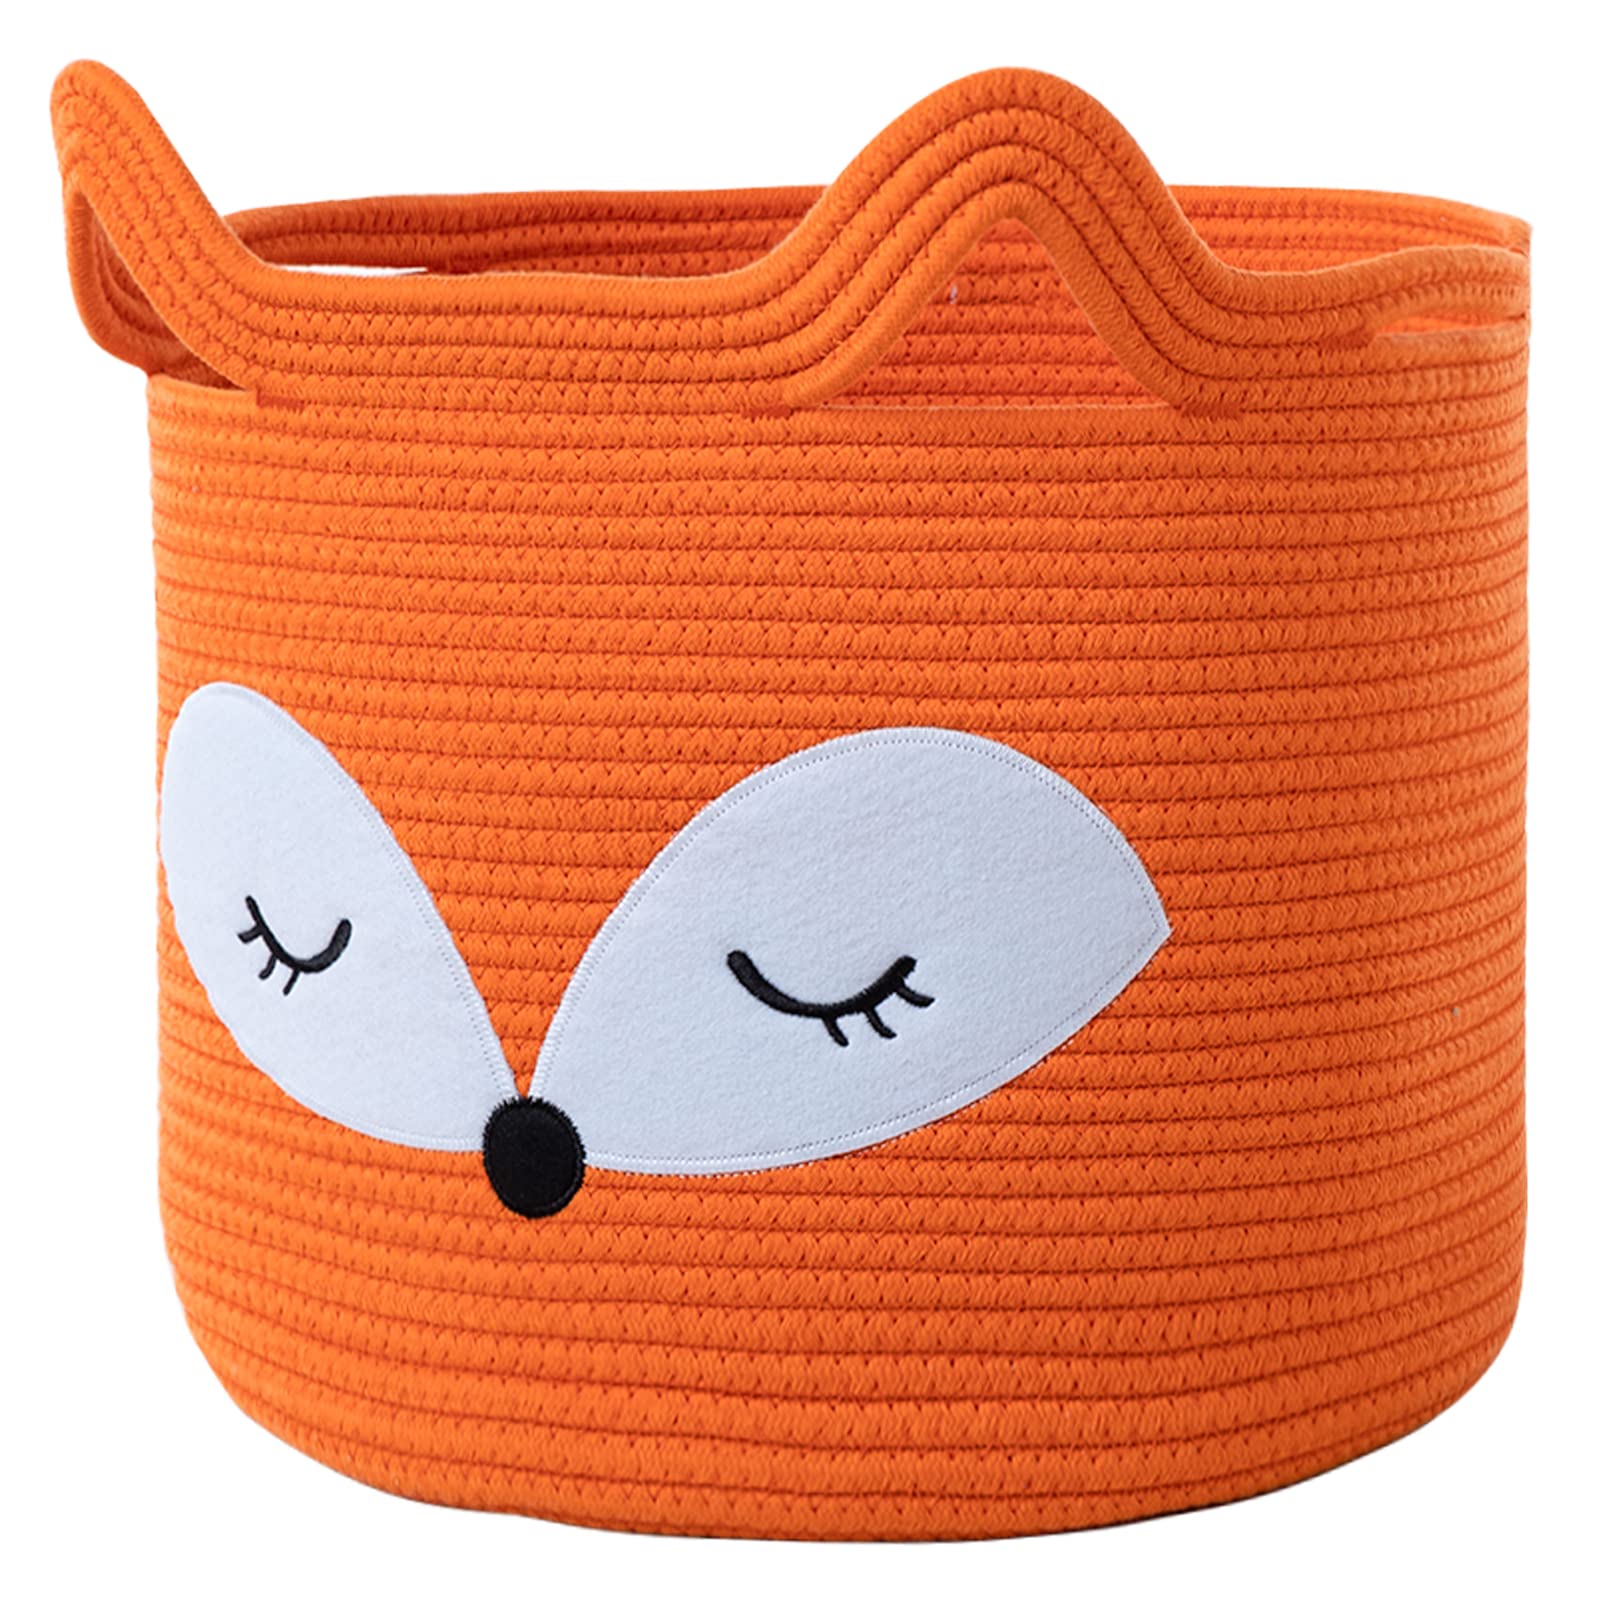 VK VK?LIVING Fox Toy Baskets Cotton Rope Animal Baskets Orange Laundry Baskets For Toys, Clothes,Gifts,Towels, Blankets,Pet Bed 